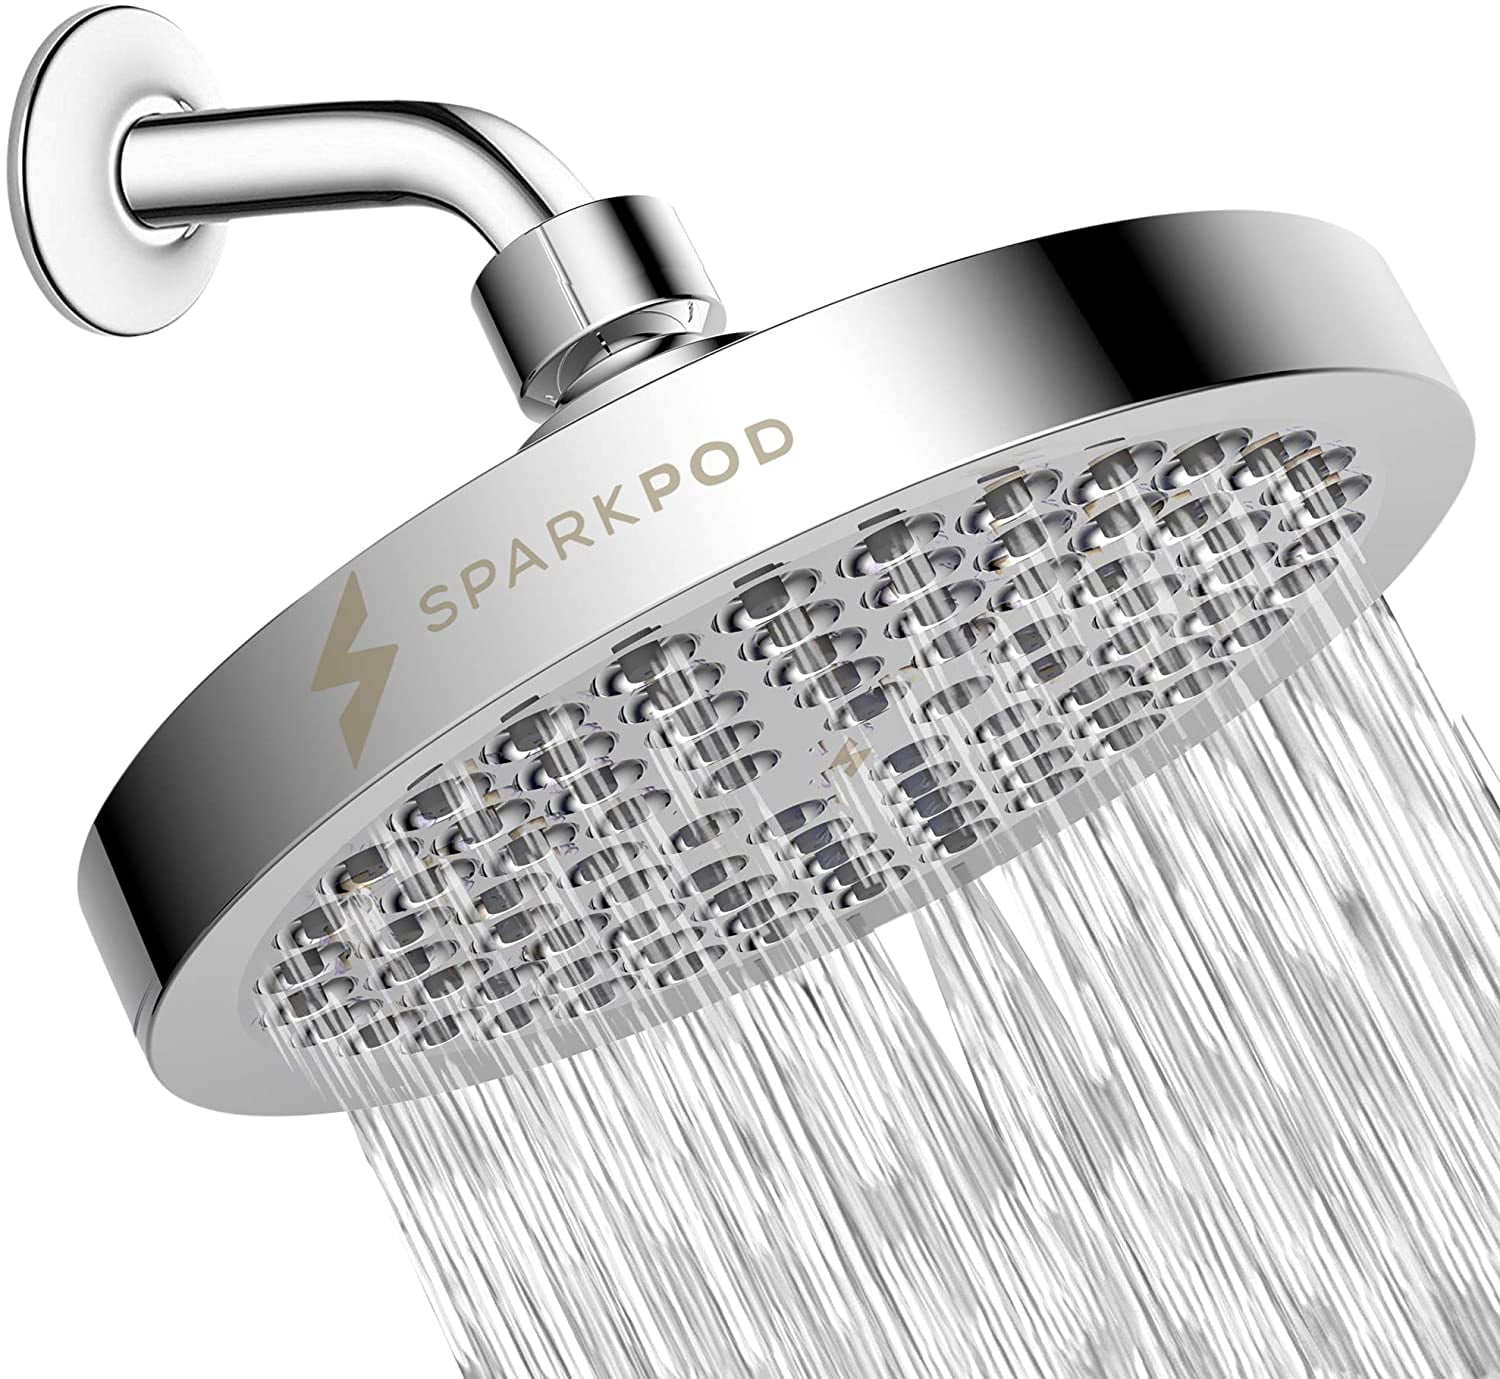 Easy Tool Free Installation Luxury Modern Black Look High Pressure Rain SparkPod Shower Head The Perfect Adjustable Replacement For Your Bathroom Shower Heads Black Matte